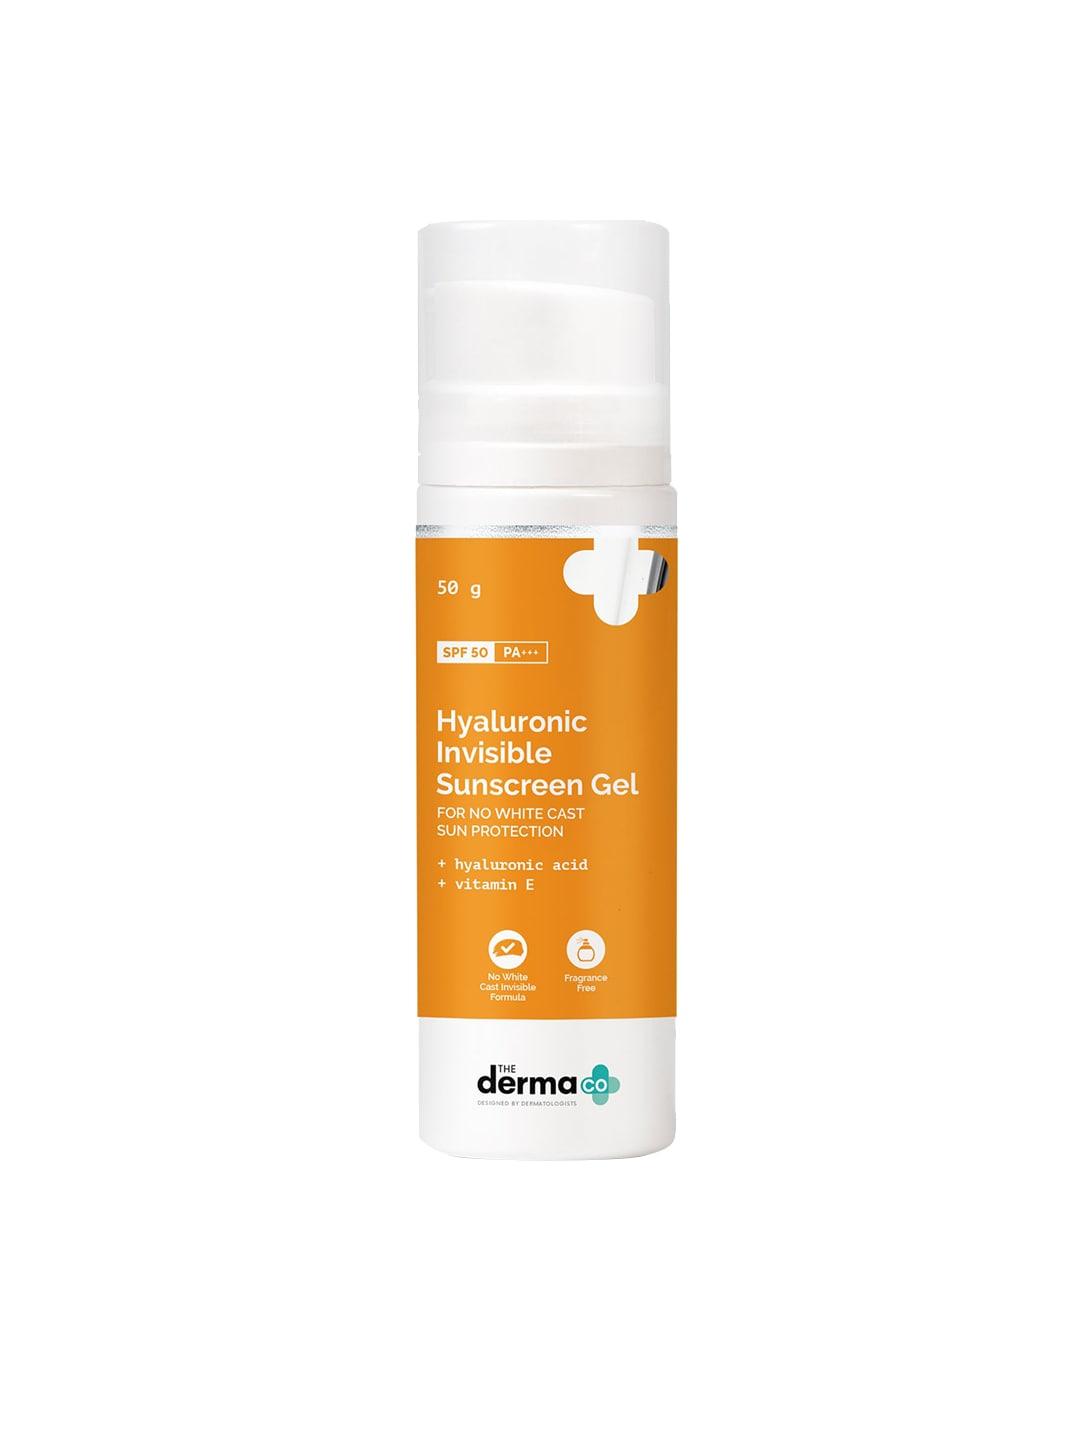 The Derma co. Hyaluronic Invisible Sunscreen Ge 50g